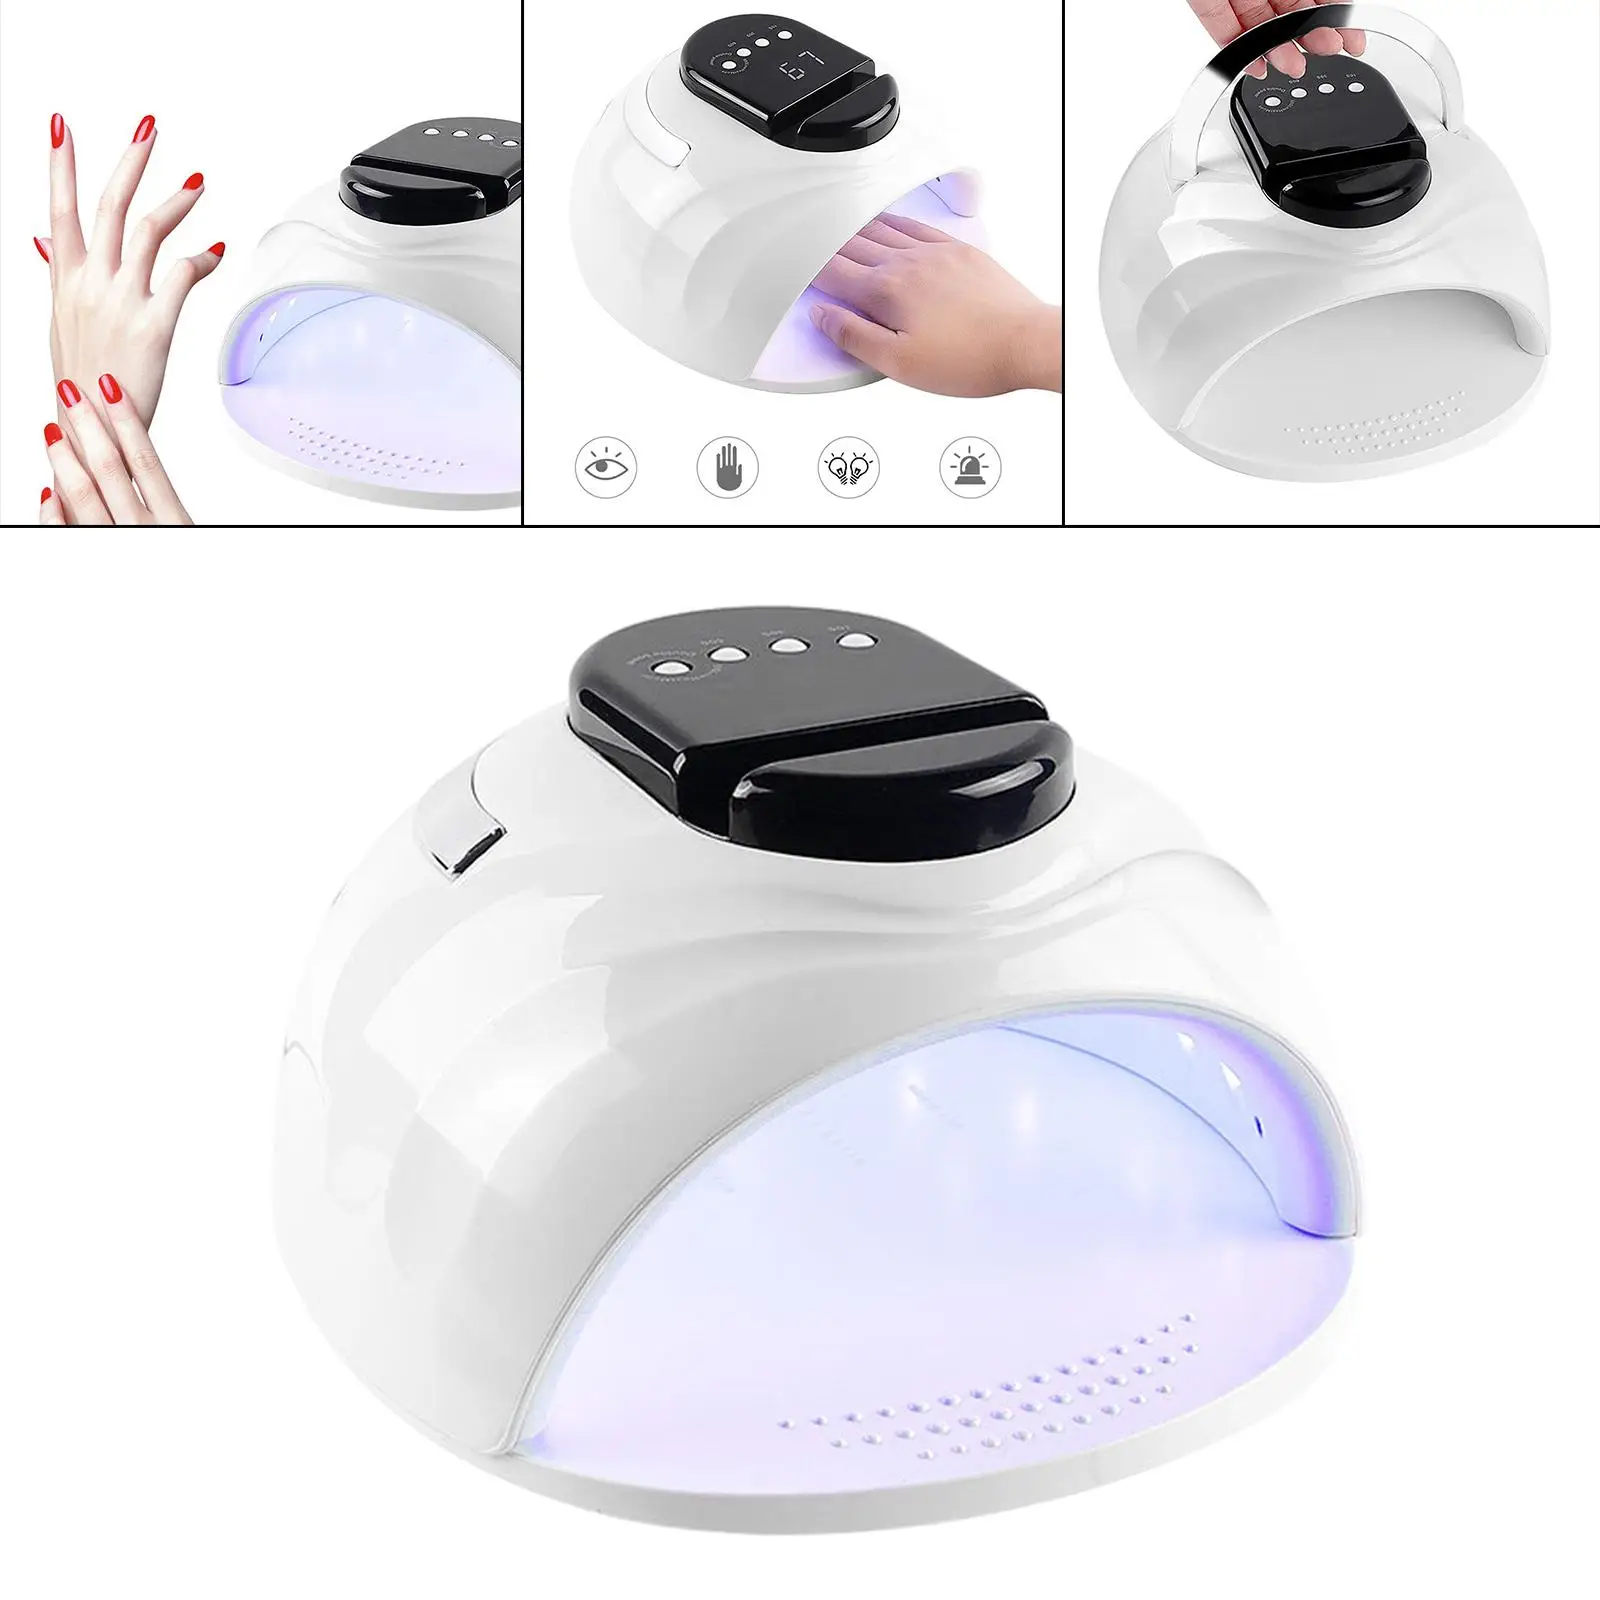 Nail Polish Dryer ,10S/30S/60S , Lamp Gel Acrylic Curing Light with 42 Pcs Light Bead for Home ,Salon, Manicure Pedicure